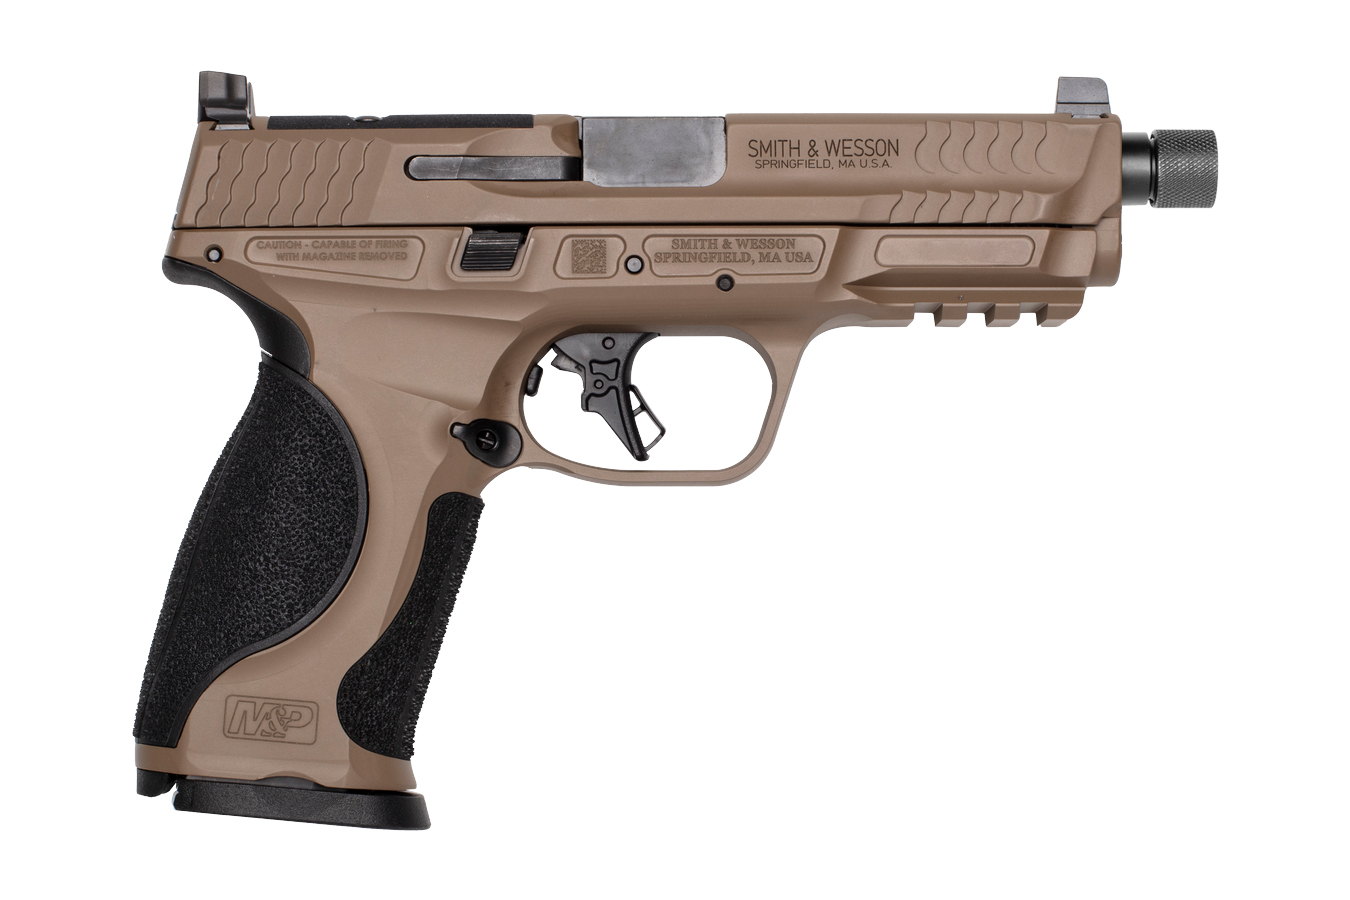 No. 14 Best Selling: SMITH AND WESSON MP 9 M2.0 9MM METAL OR NTS FDE FINISH 4.625 IN TB 17 RD